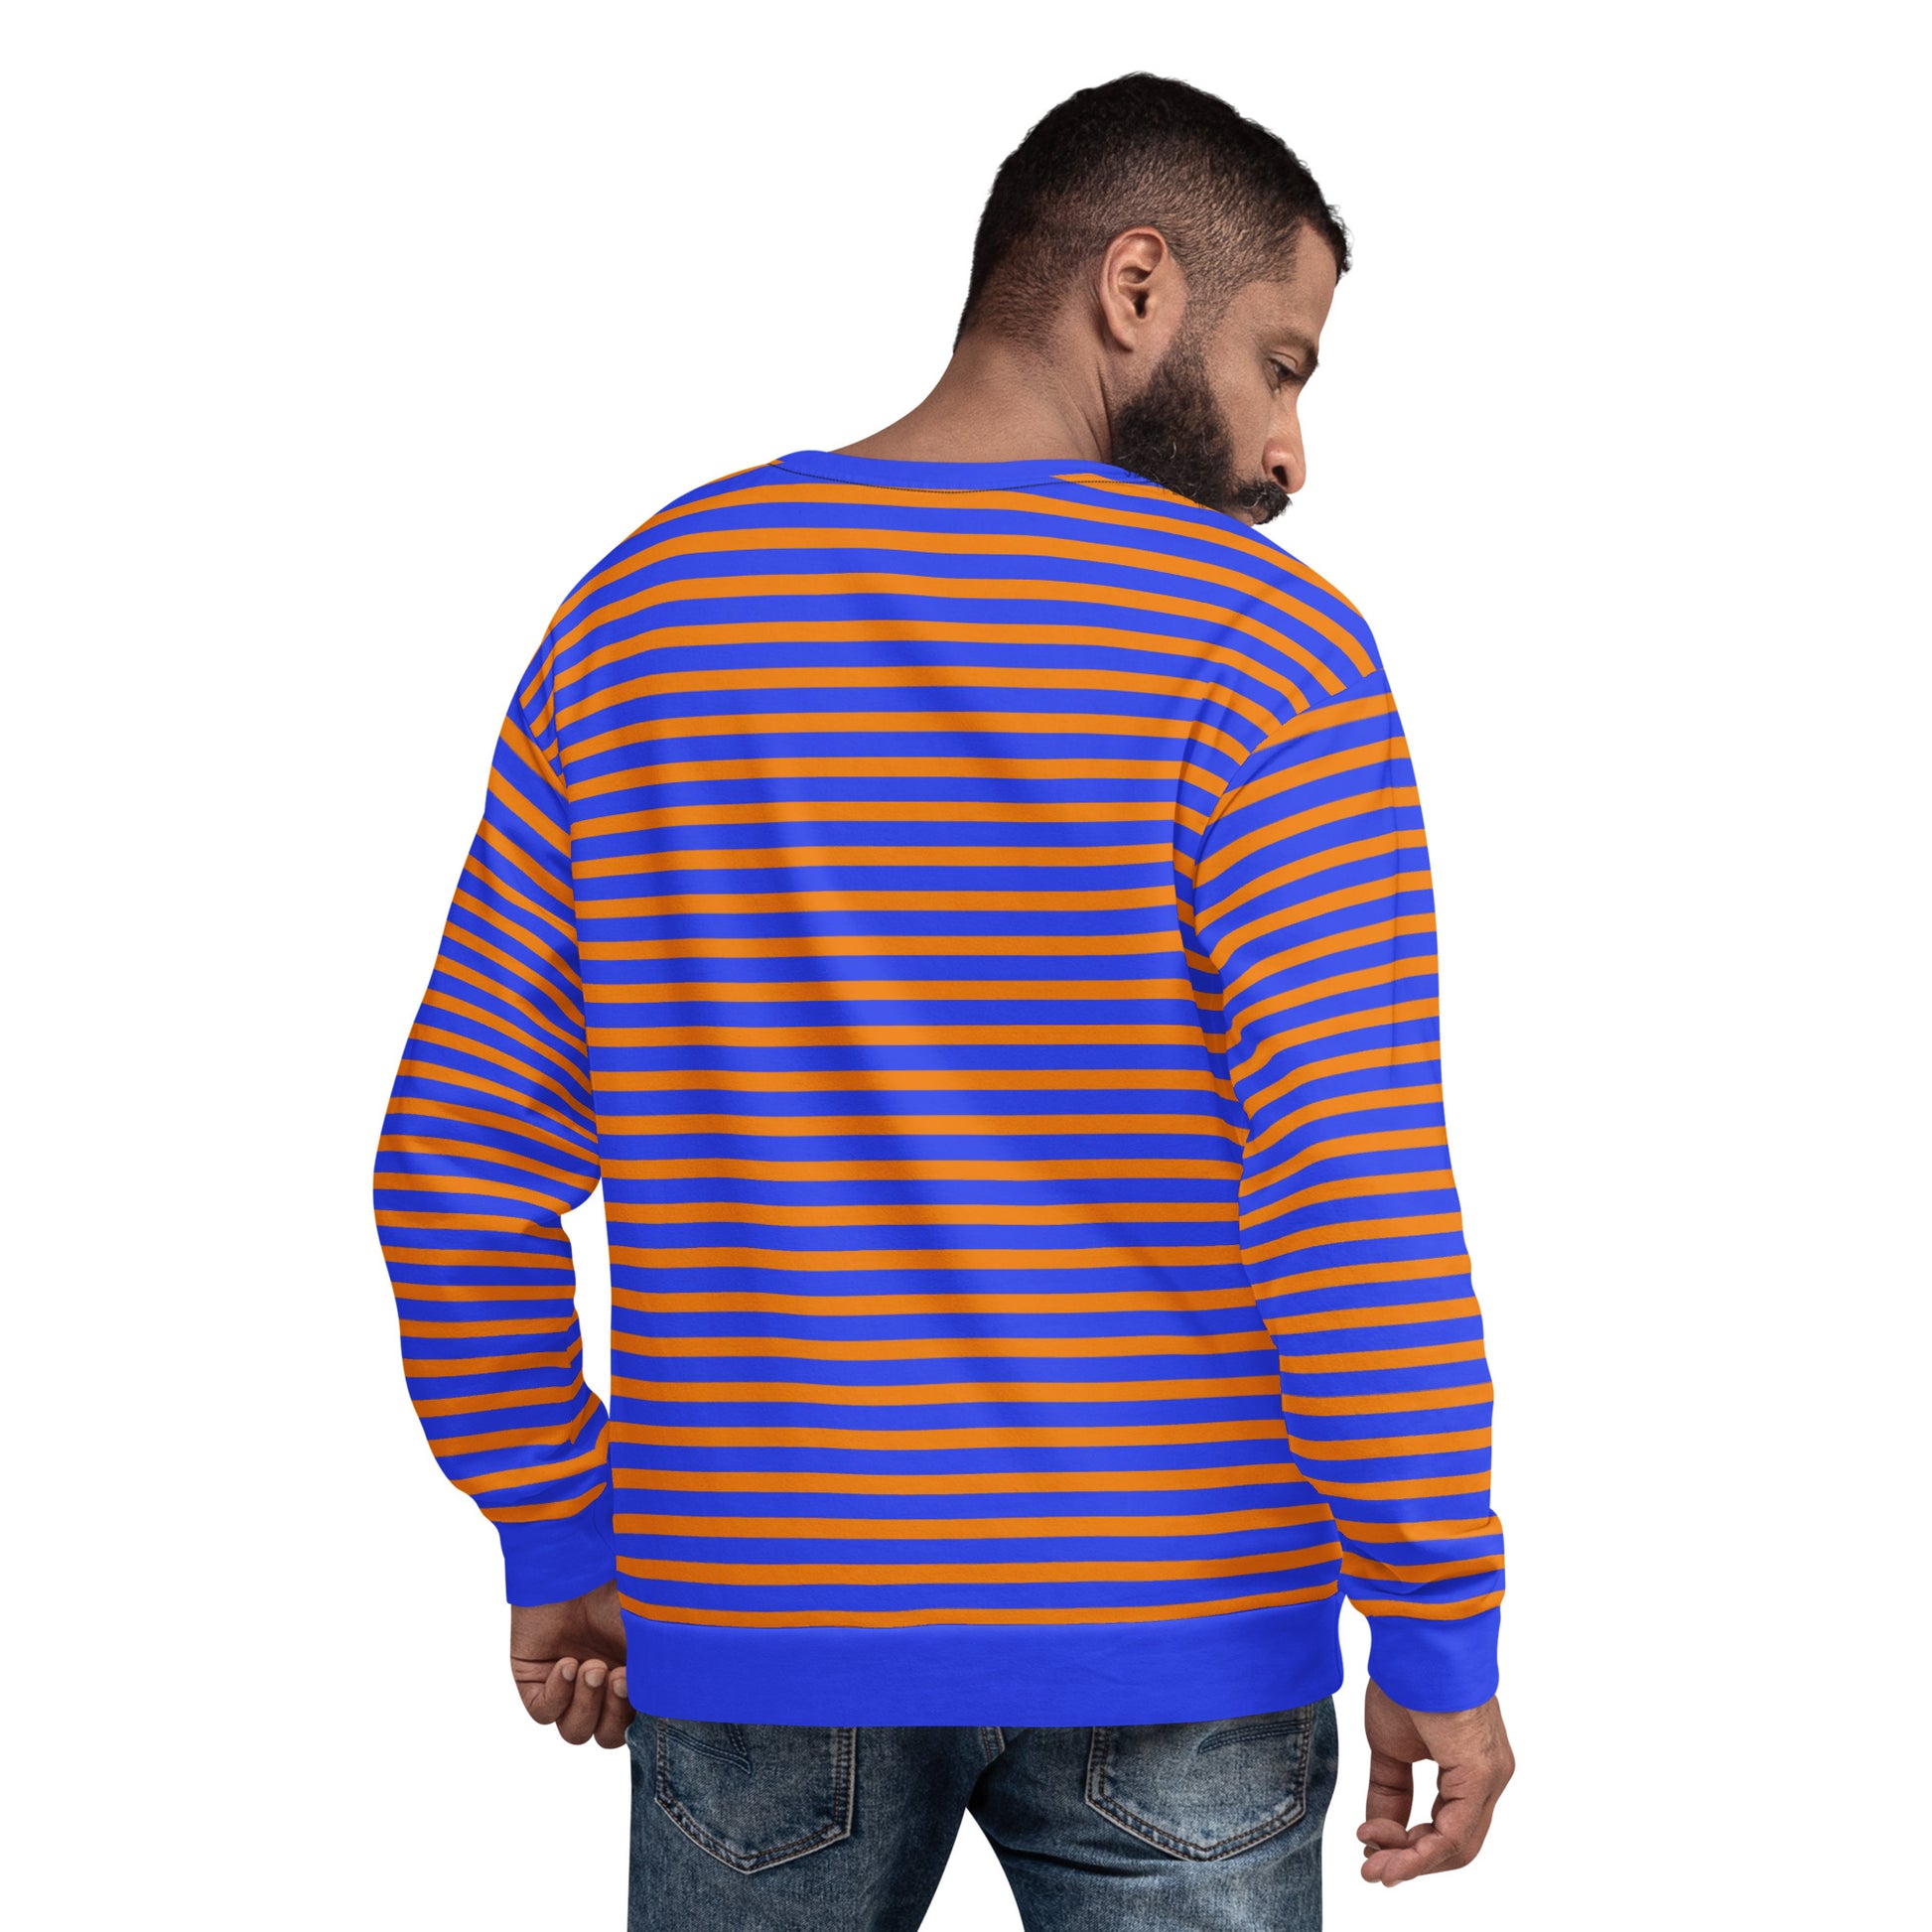 Striped Sweater: Blue and Orange Stripes for a Timeless Look